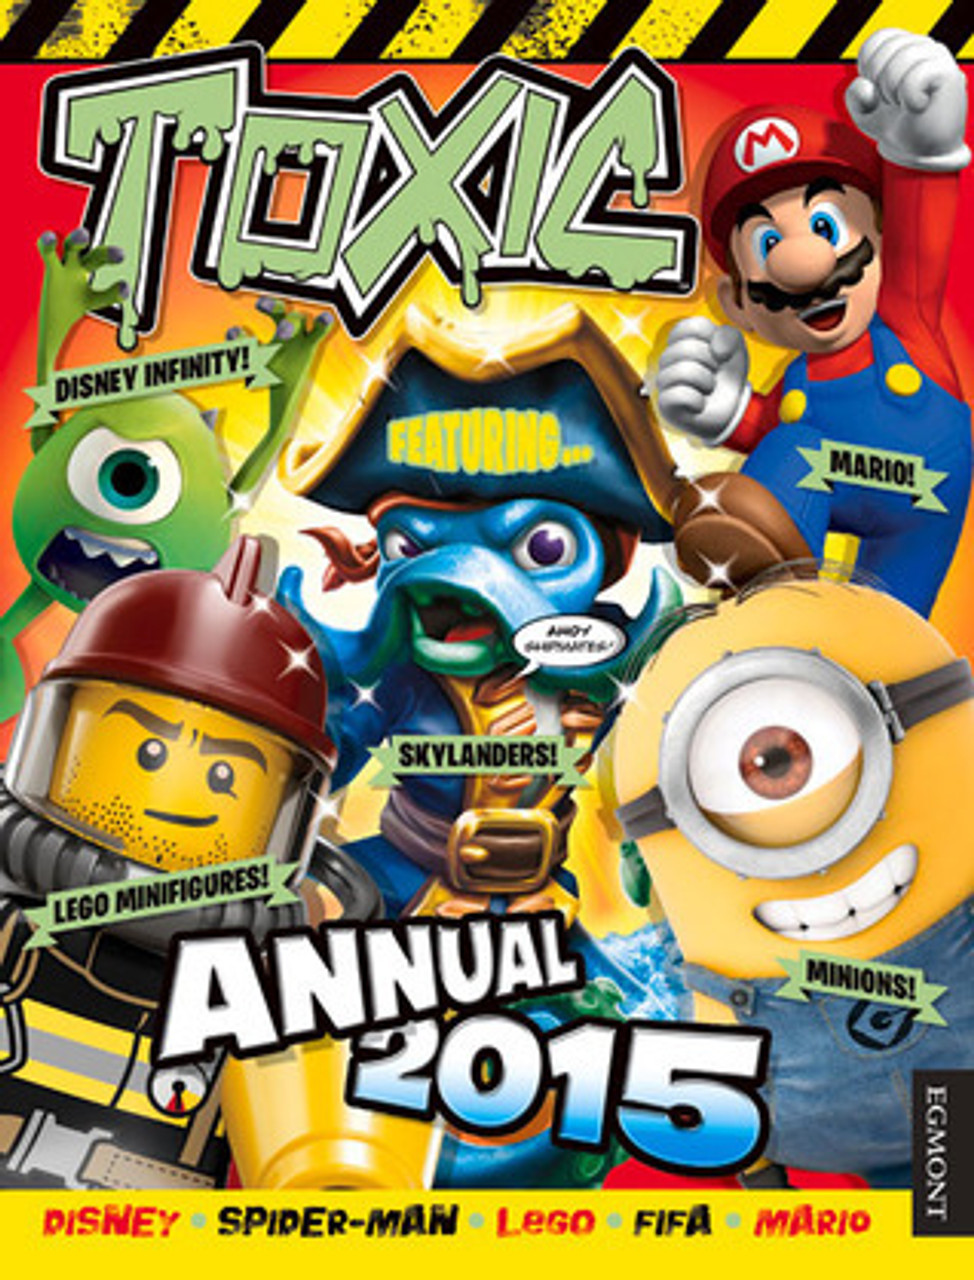 Toxic Annual 2015 (Children's Coffee Table book)